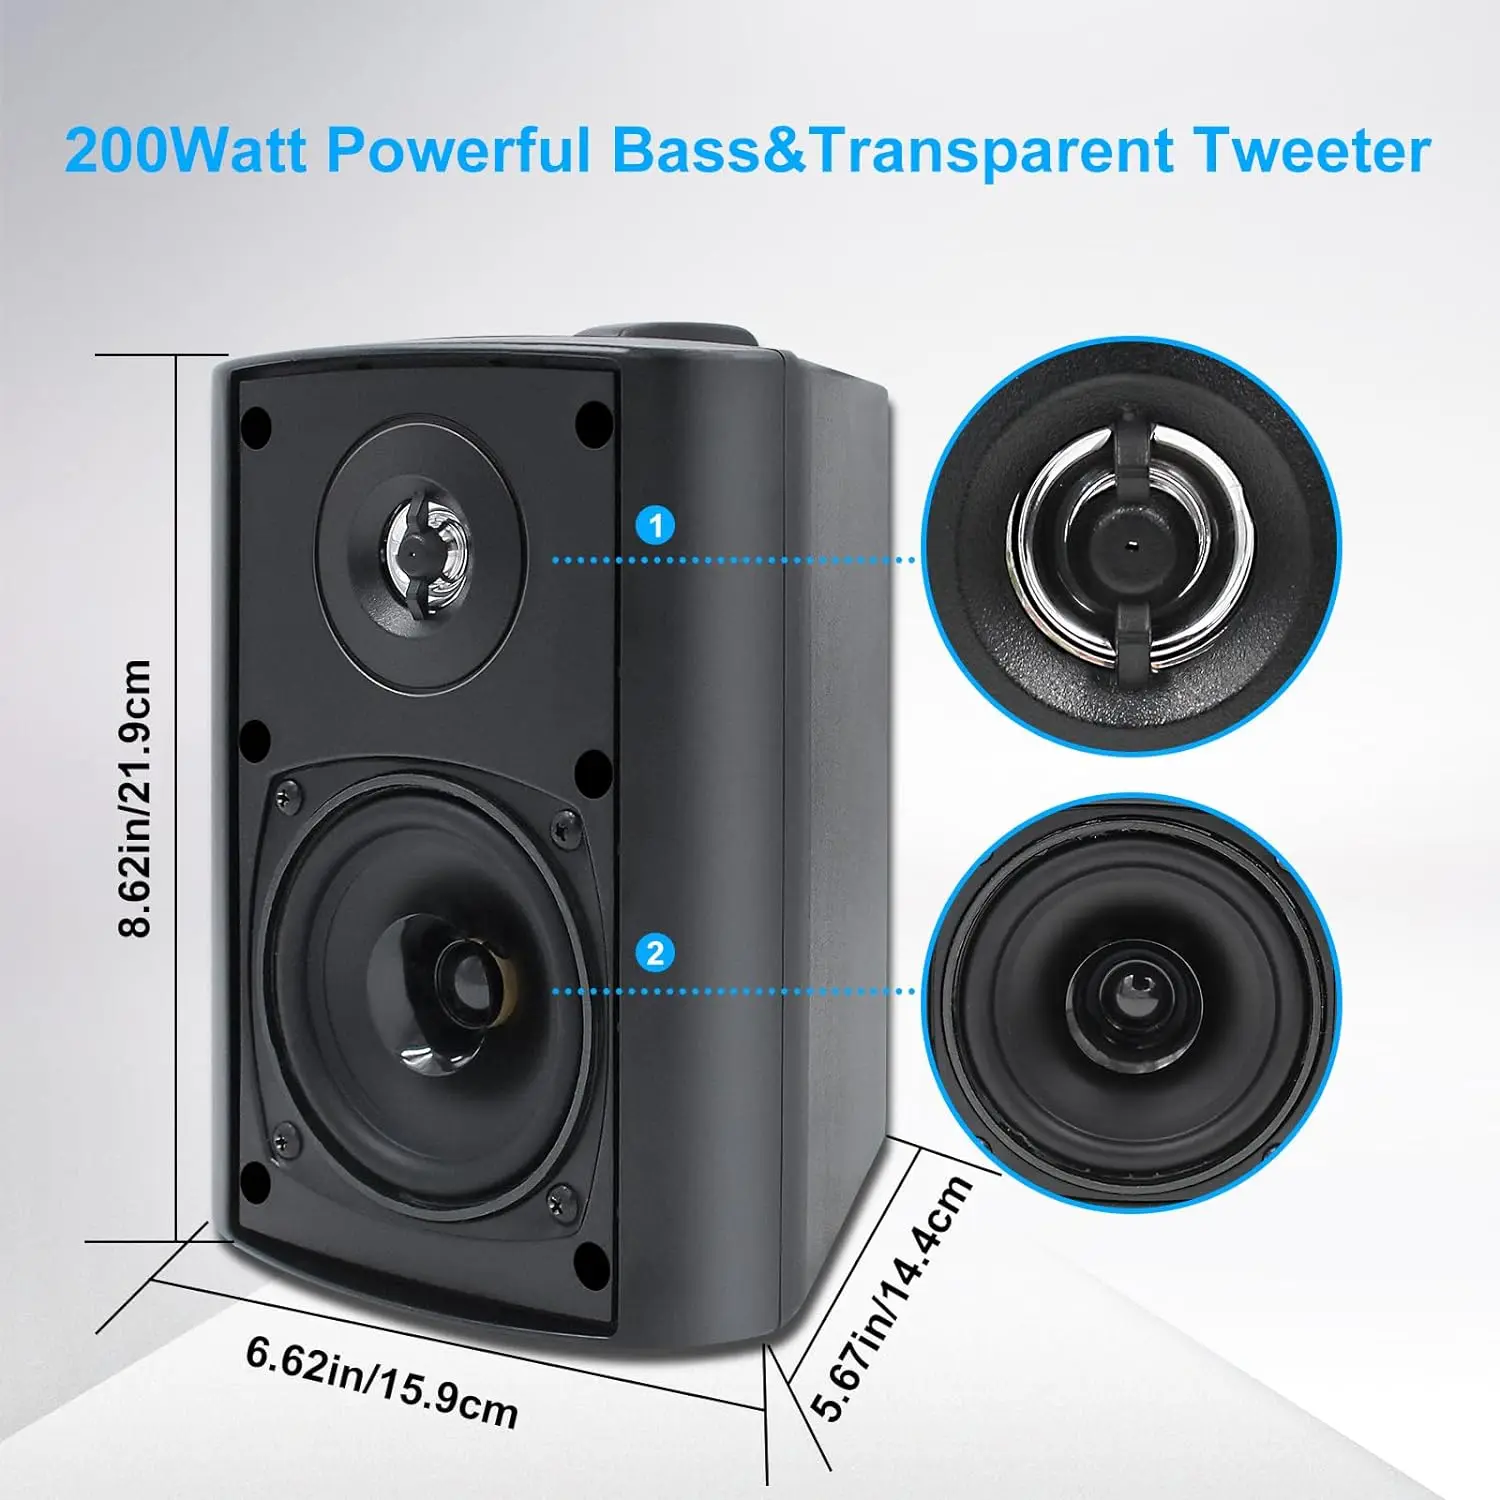 Herdio 4 Inches Passive Outdoor Speakers With 200Watt Powerful Bass Expansive Stereo Sound Coverage All-Weather Durability Pair